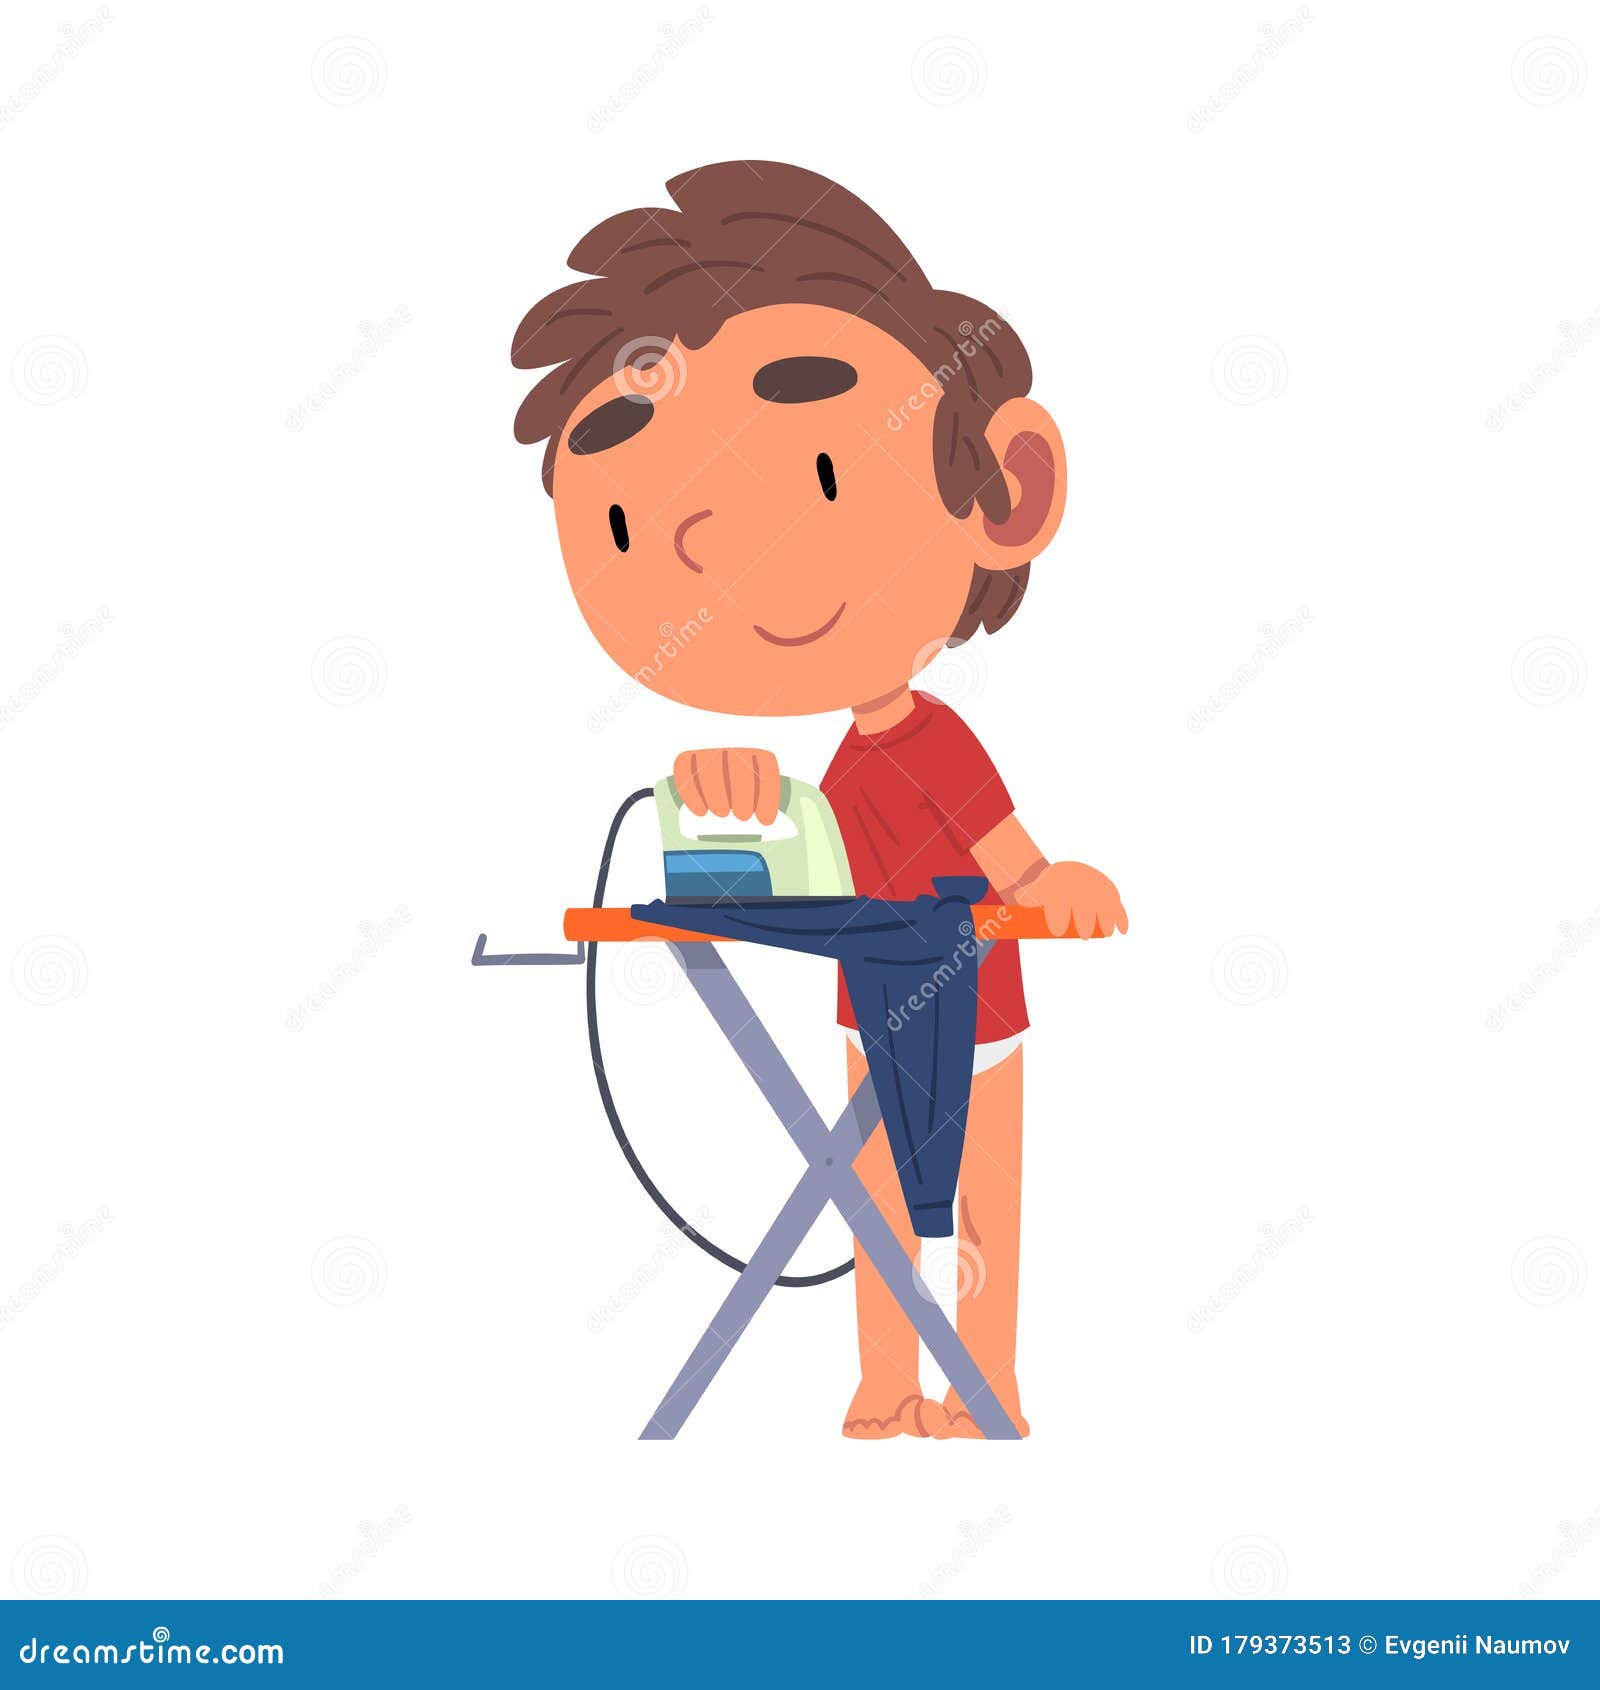 Cute Boy Ironing His Clothes, daily Routine Activity Cartoon Vector  Illustration Stock Vector - Illustration of child, lifestyle: 179373513